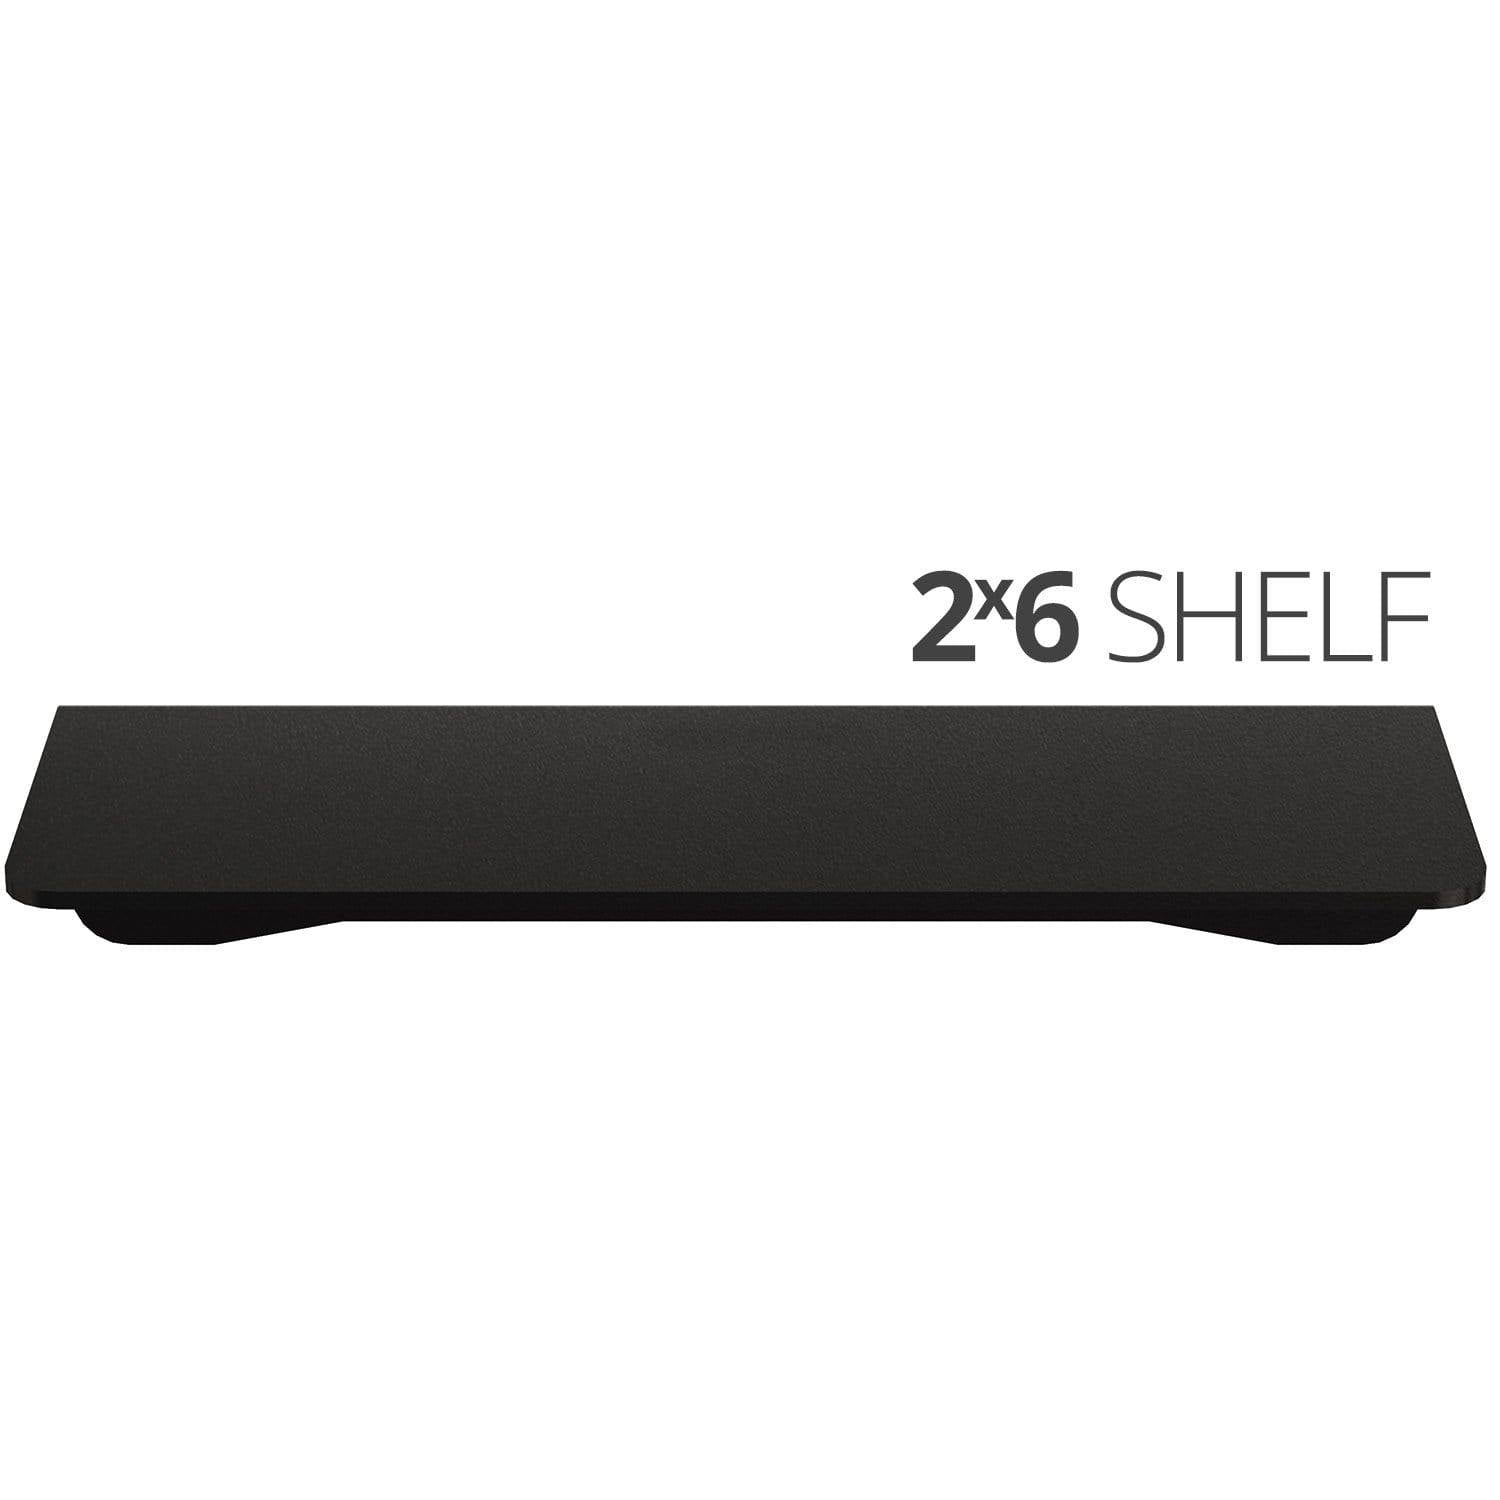 Small wall mounted shelves for home, office and garage - 2x6 top